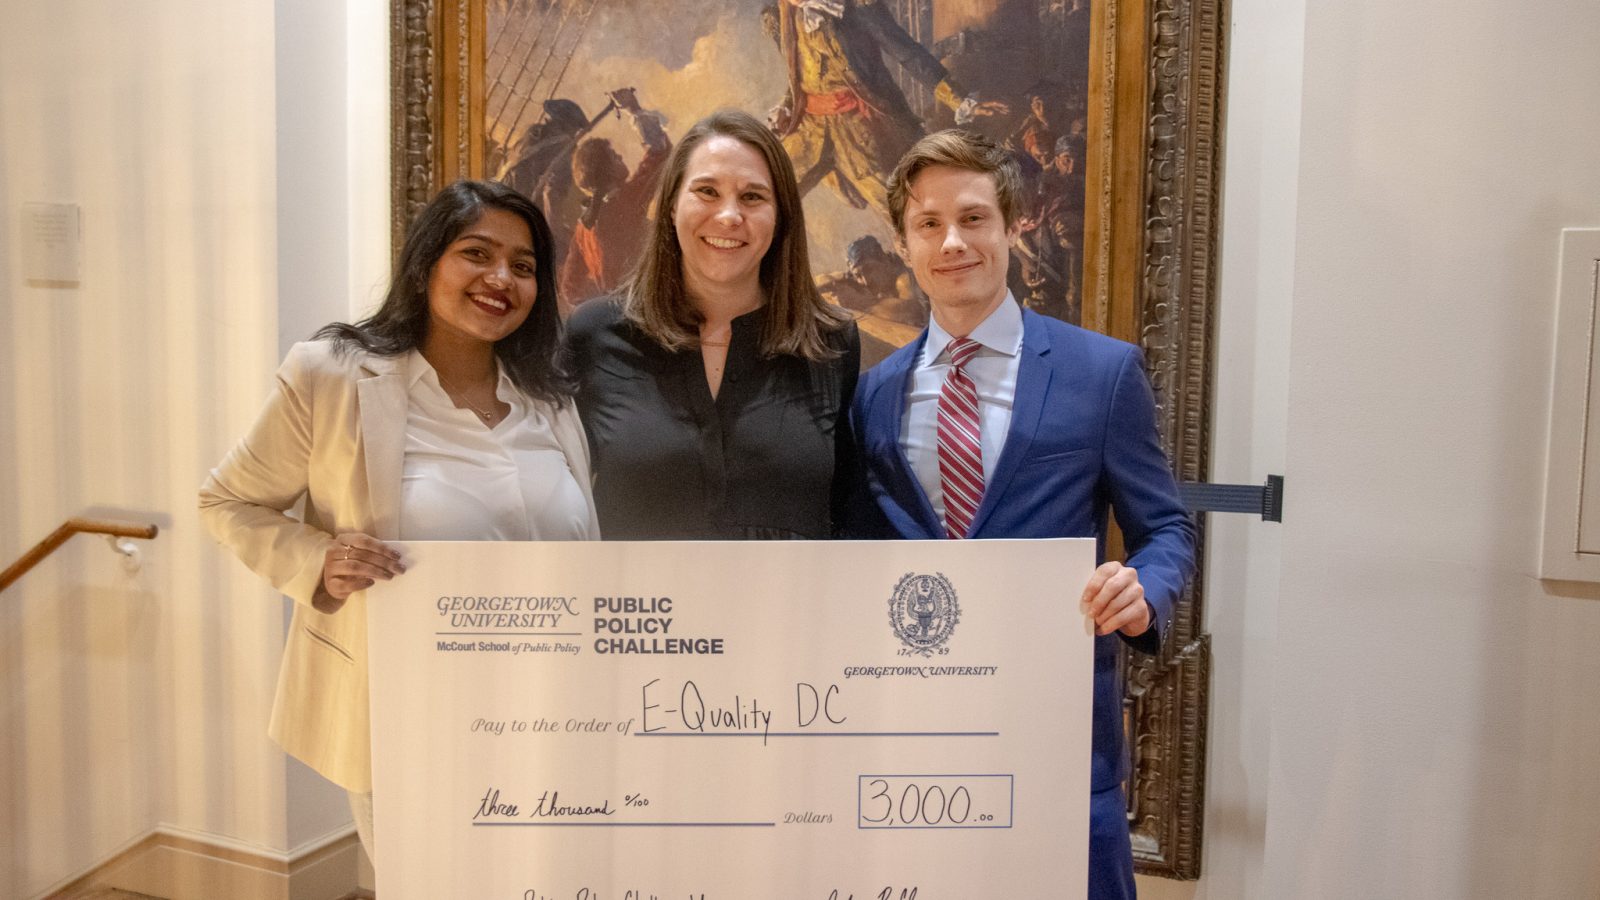 Three winners of the Georgetown Policy Challenge stand side-by-side holding a check. Behind them is an oil painting.